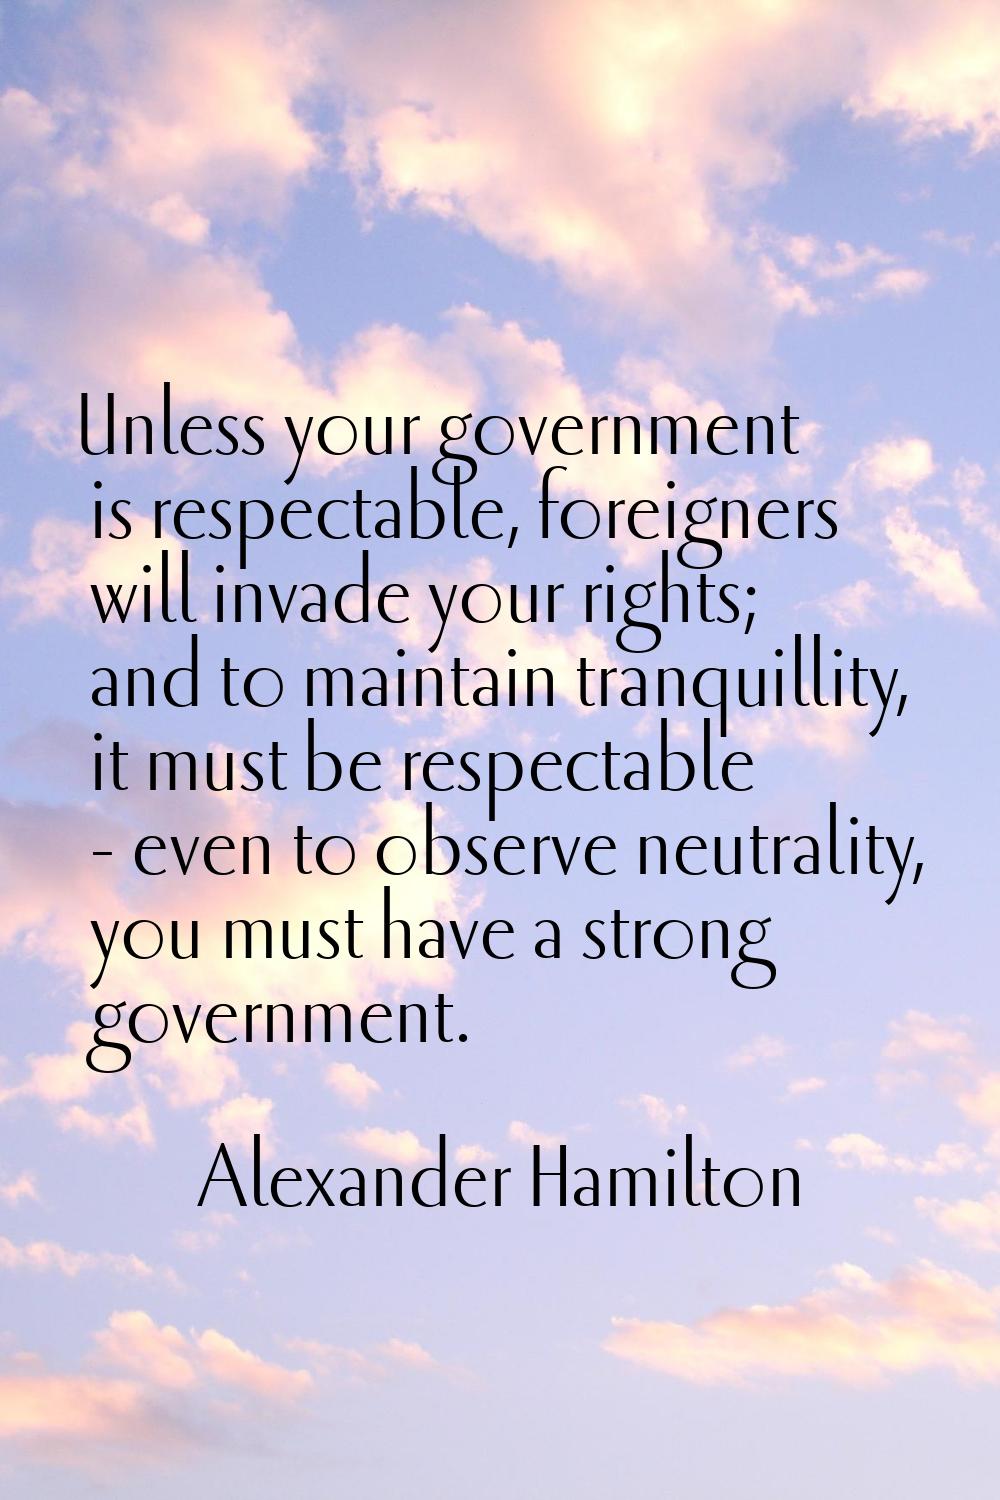 Unless your government is respectable, foreigners will invade your rights; and to maintain tranquil